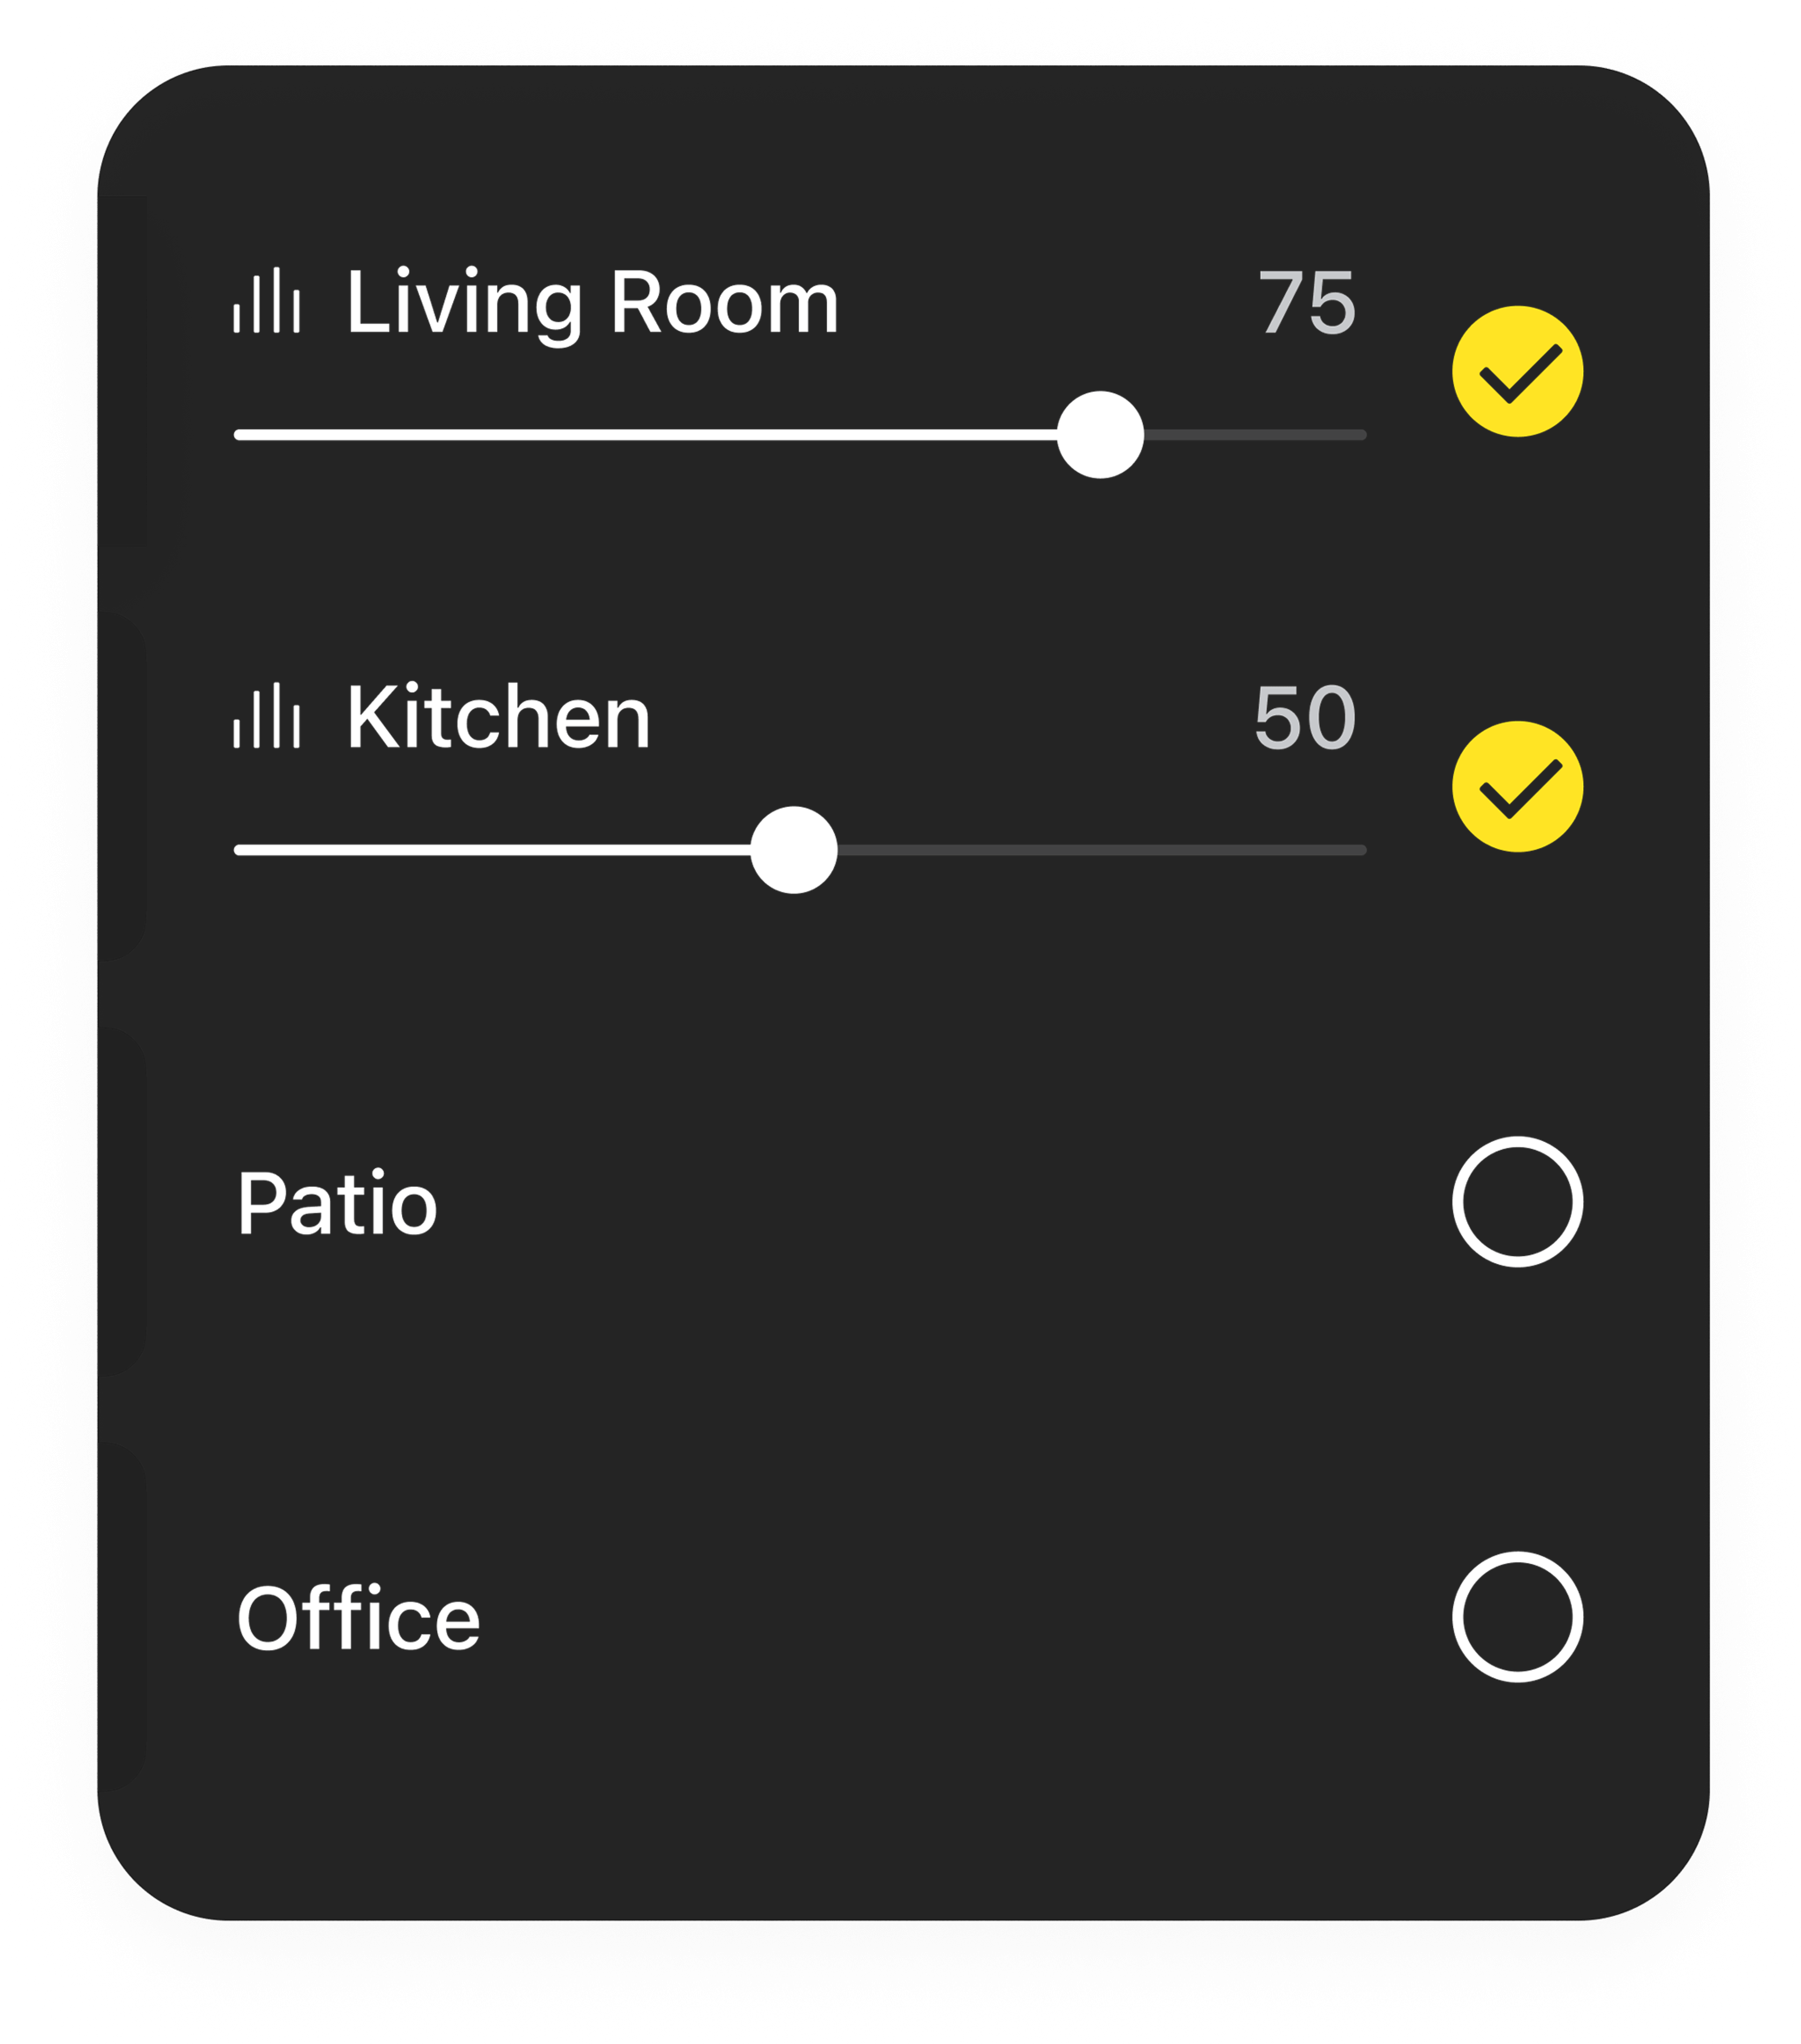 Example of the room volume controls in the Sonos app